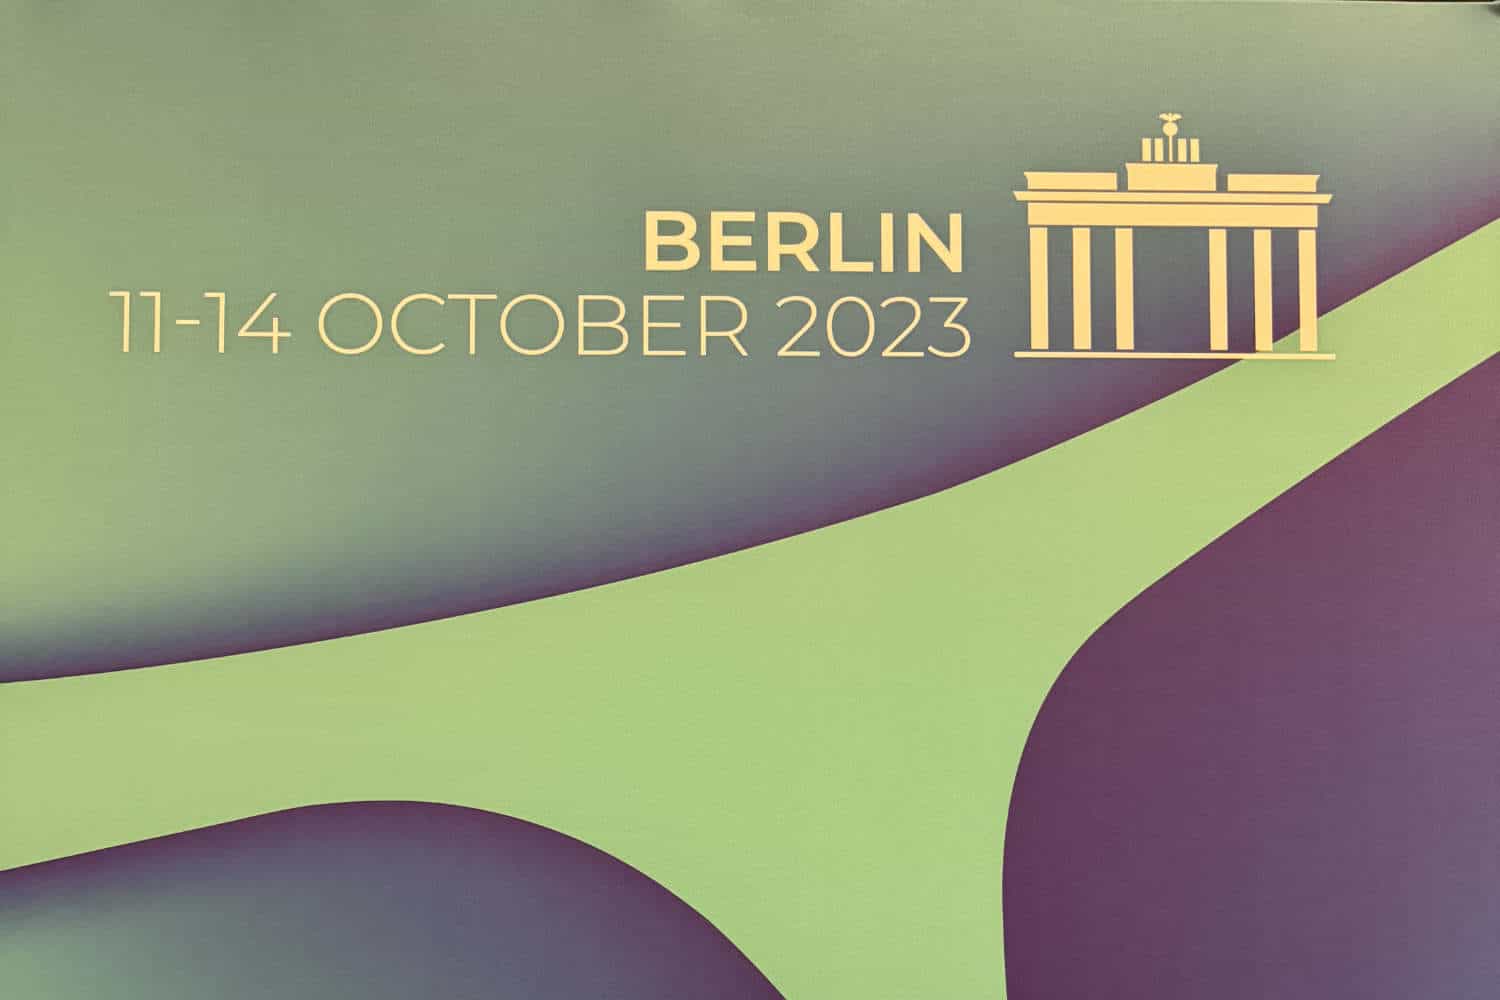 TRUST Promotion at the EADV Congress 2023 in Berlin